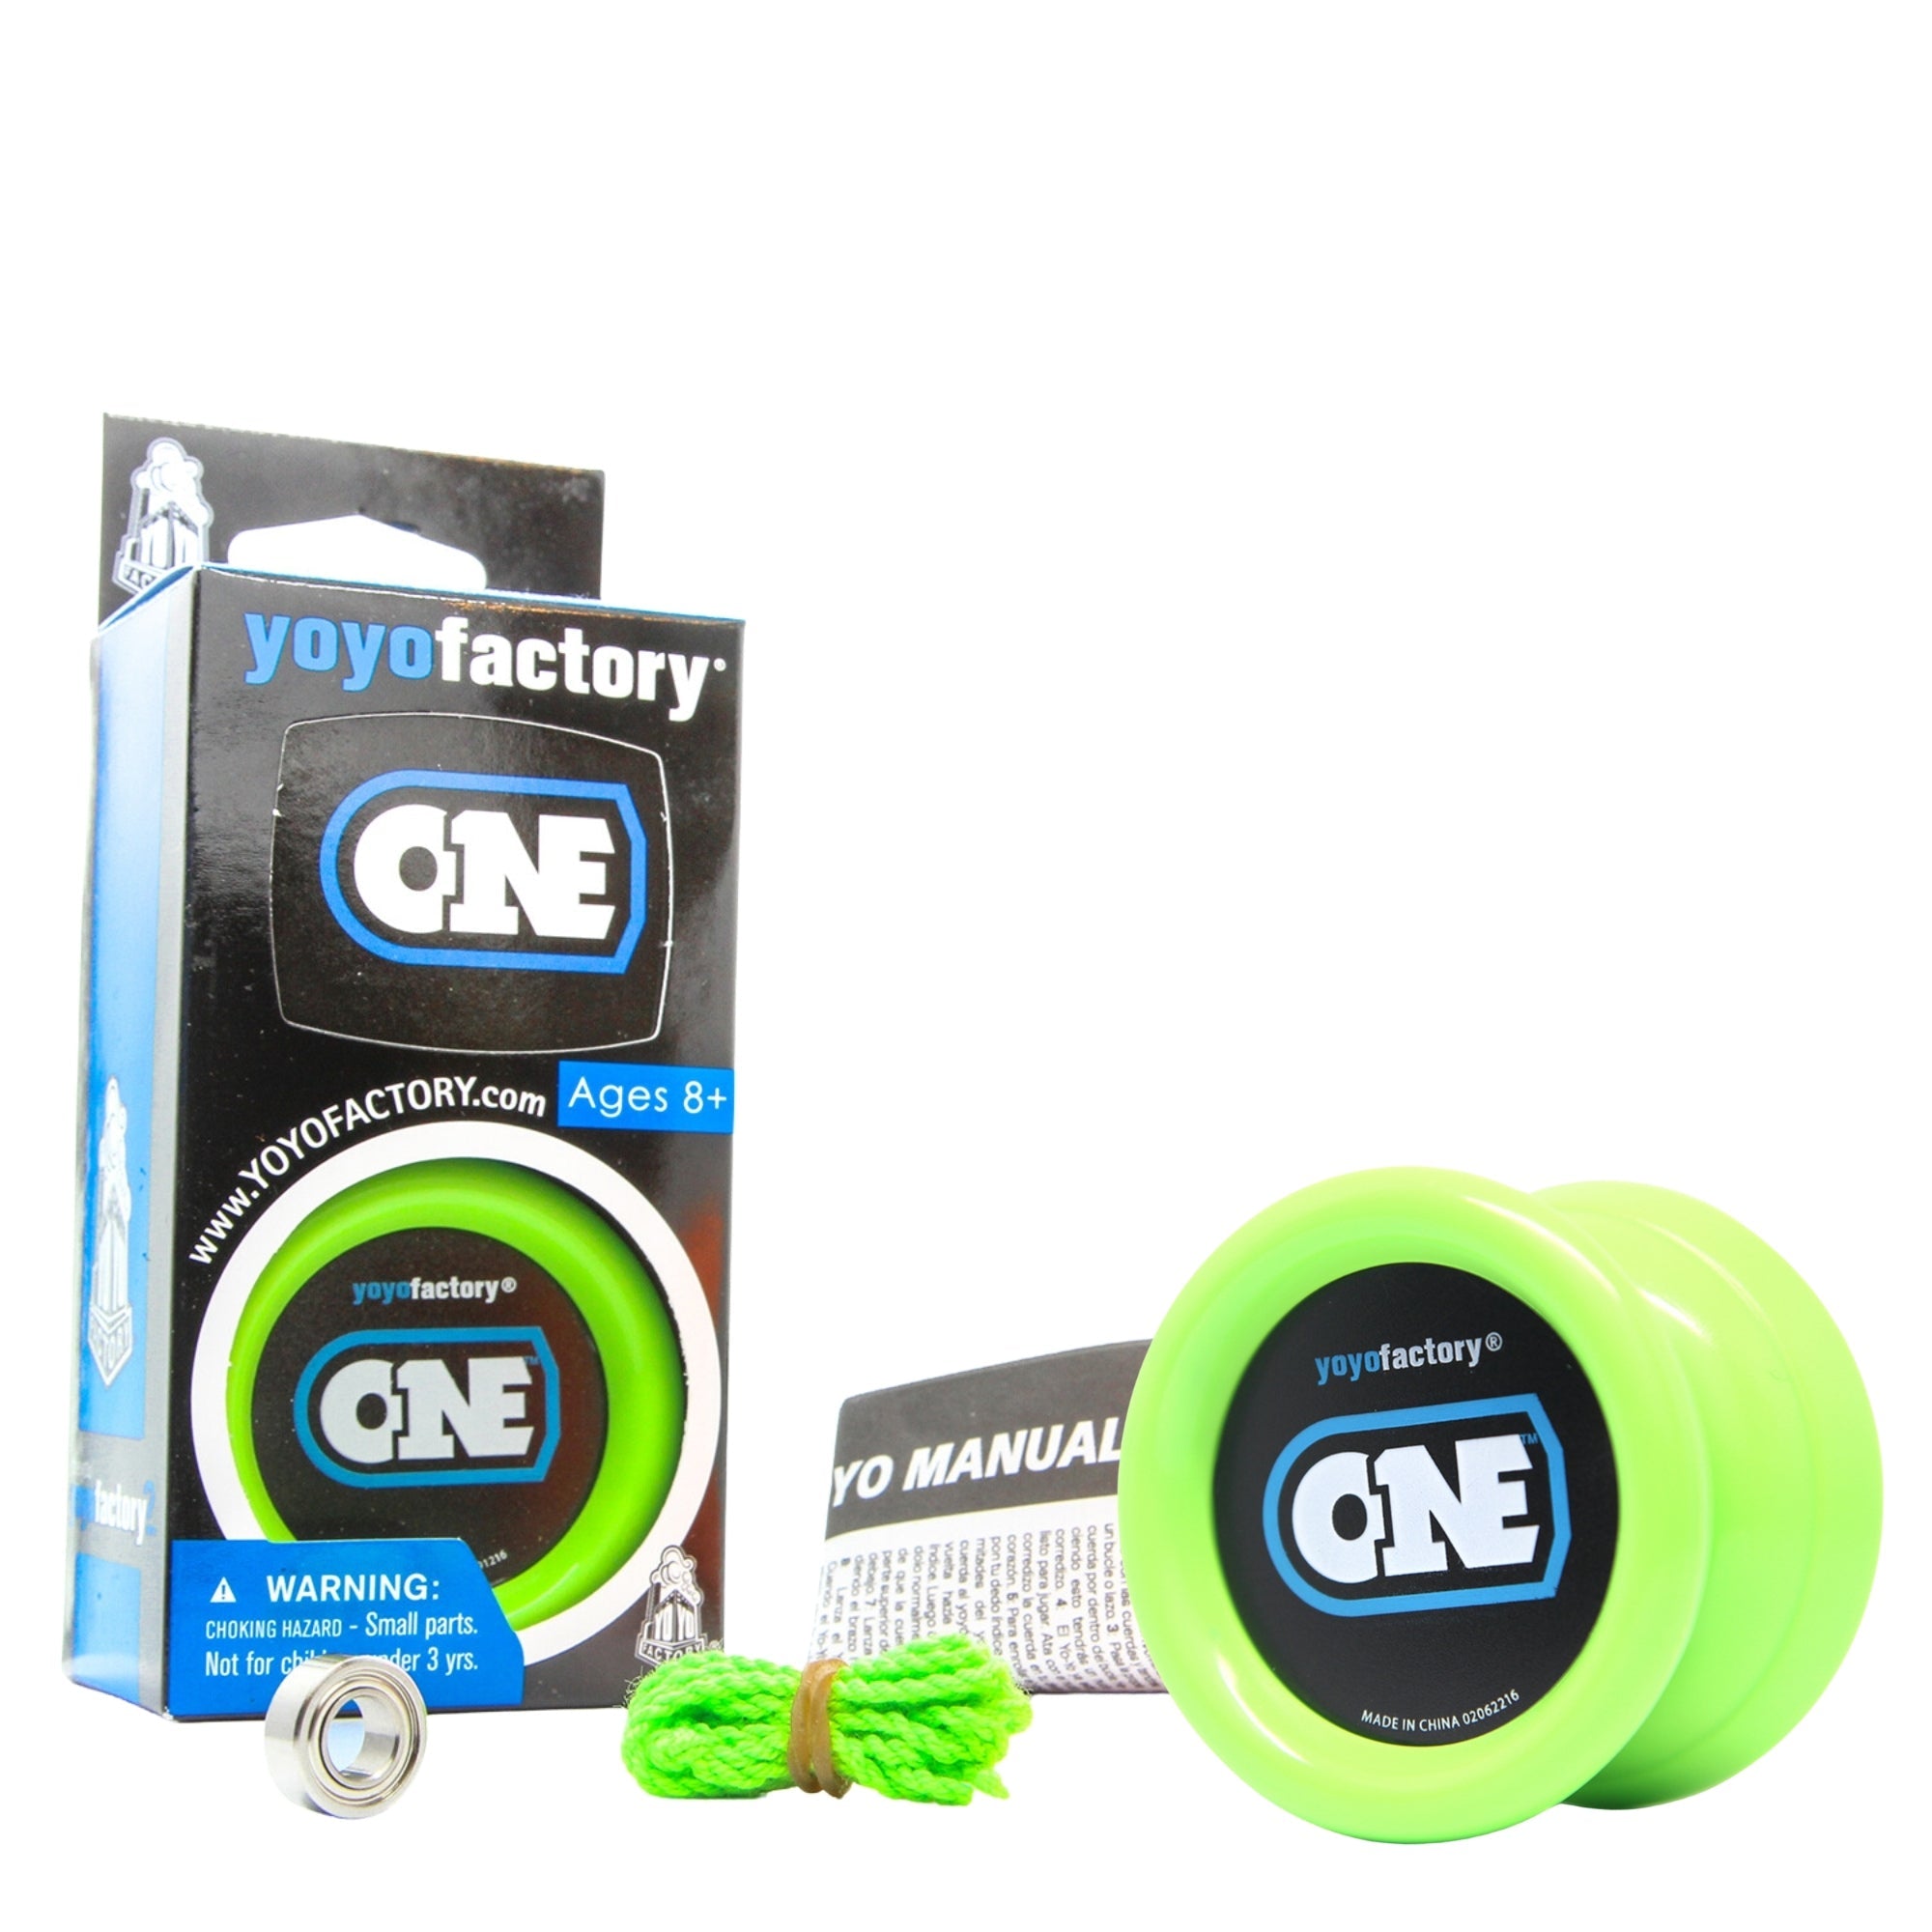 green yoyo with box and contents